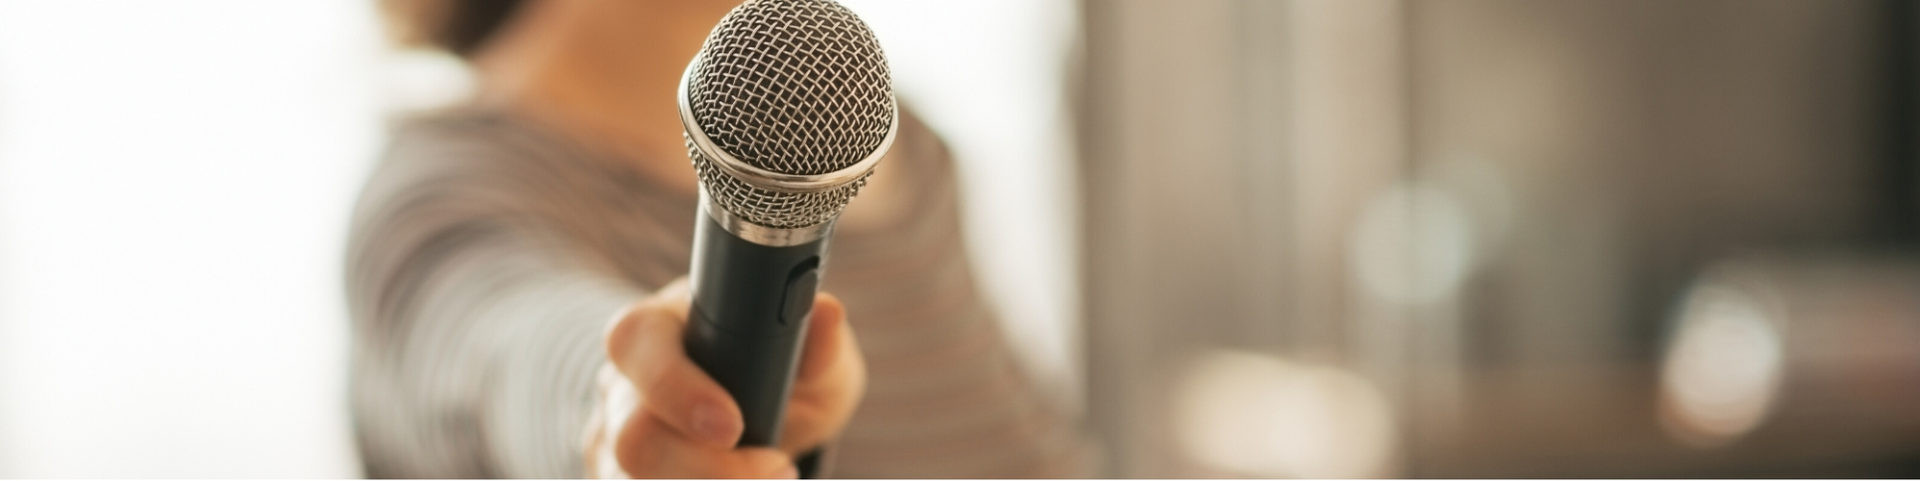 A close up of a microphone being held towards the camera.